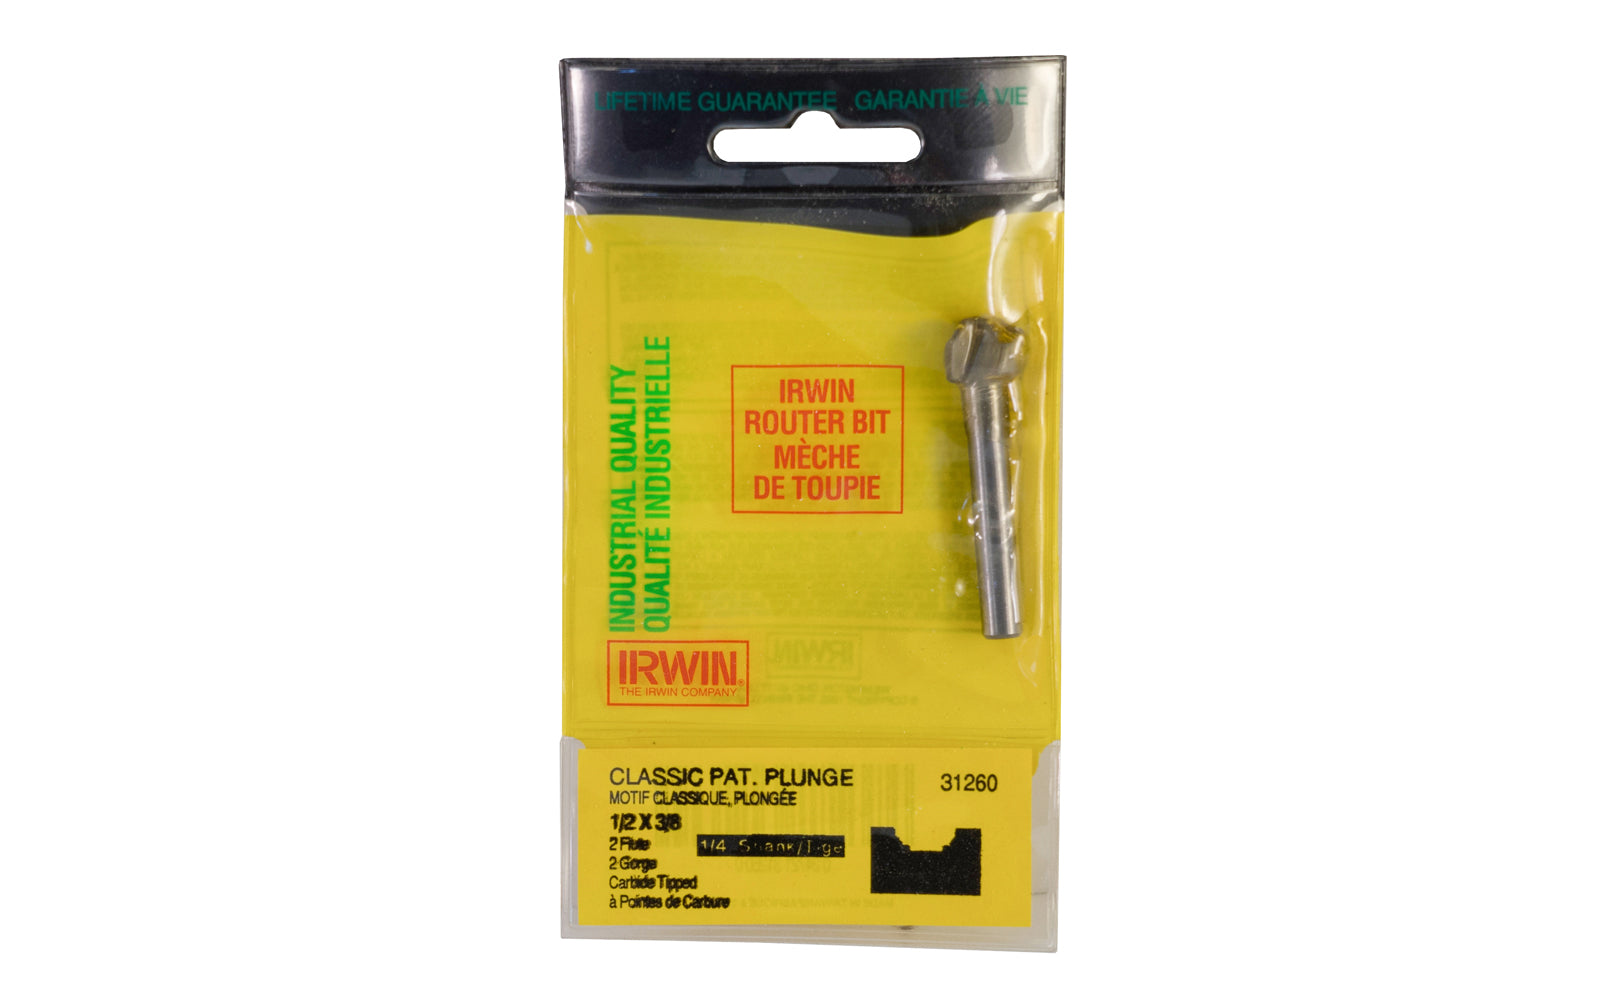 Irwin Carbide 1/2" Classic Pattern Plunge Router Bit. Carbide Tipped Router Bit. 2" overall length. 1/4" shank. Irwin Model No. 31260.